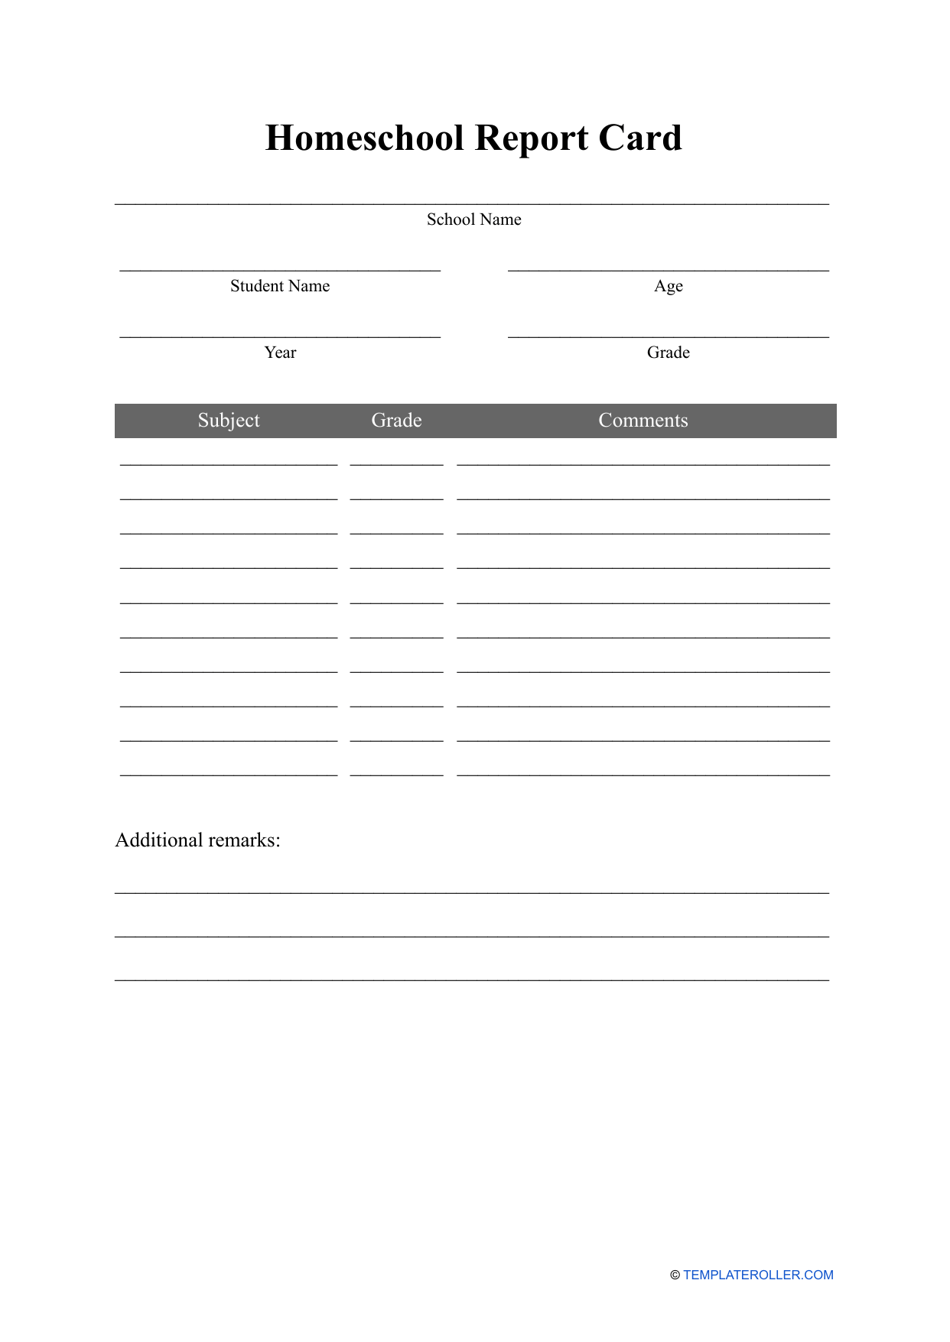 Homeschool Report Card Template Download Printable PDF Within Student Information Card Template